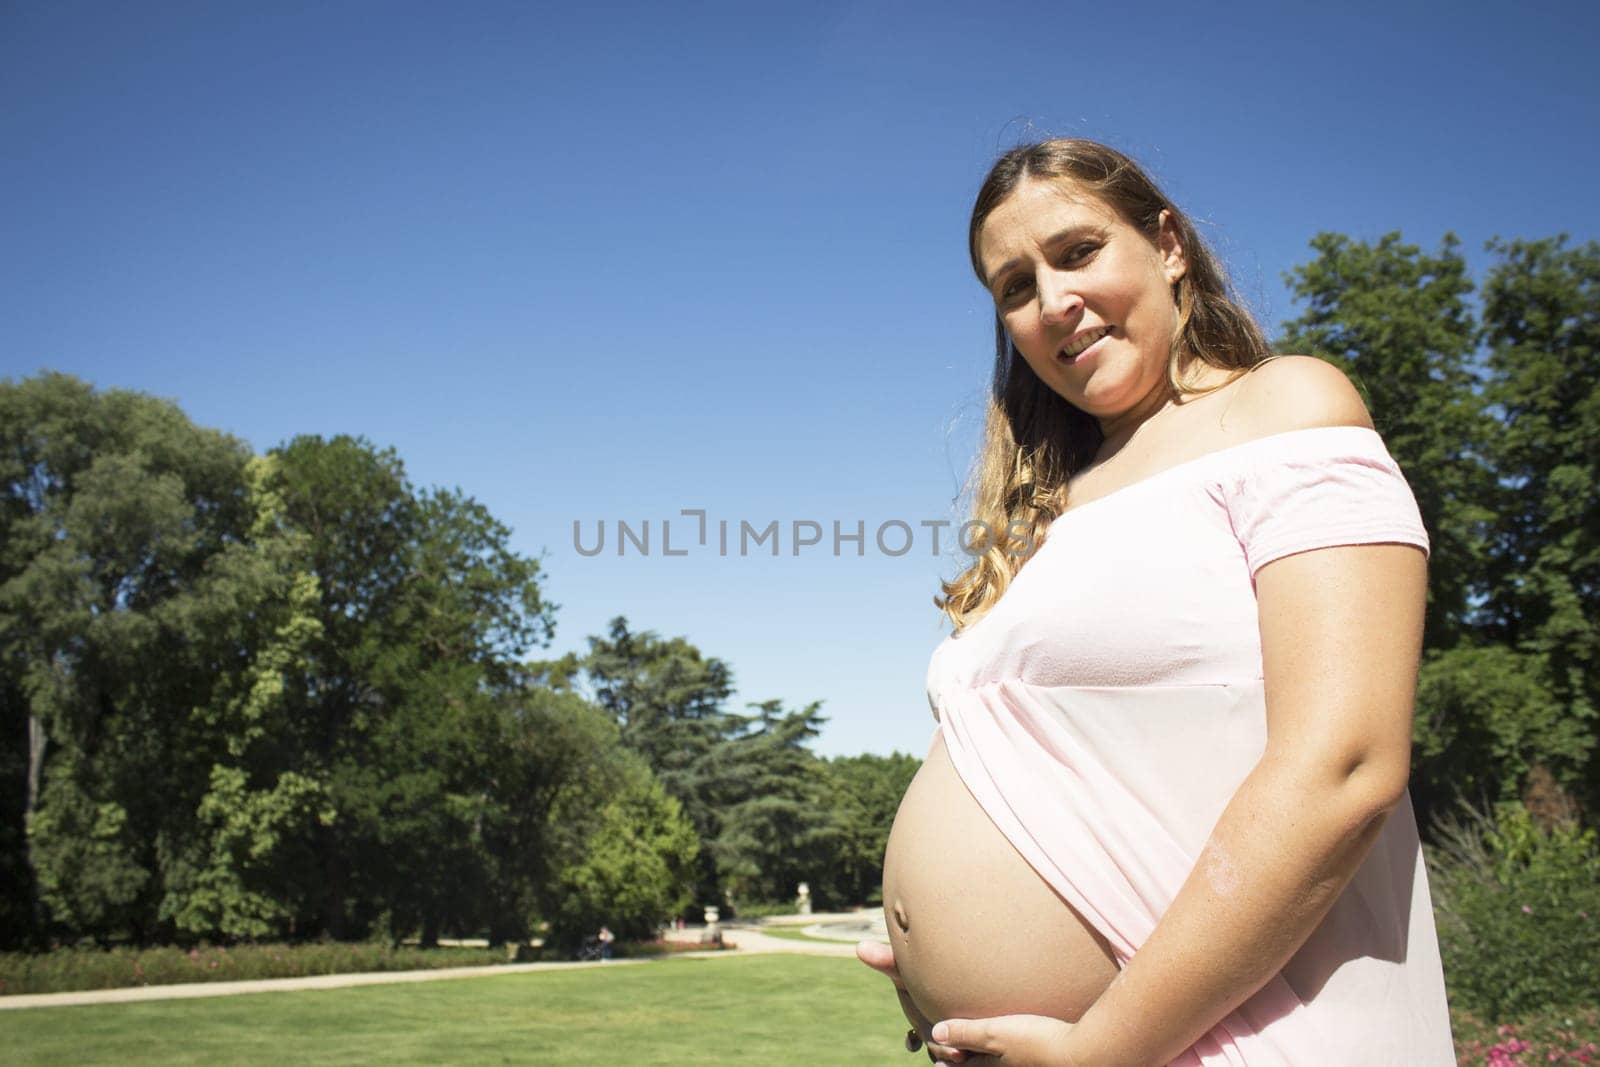 Seven month pregnant woman standing dressed in pink. Happy expression